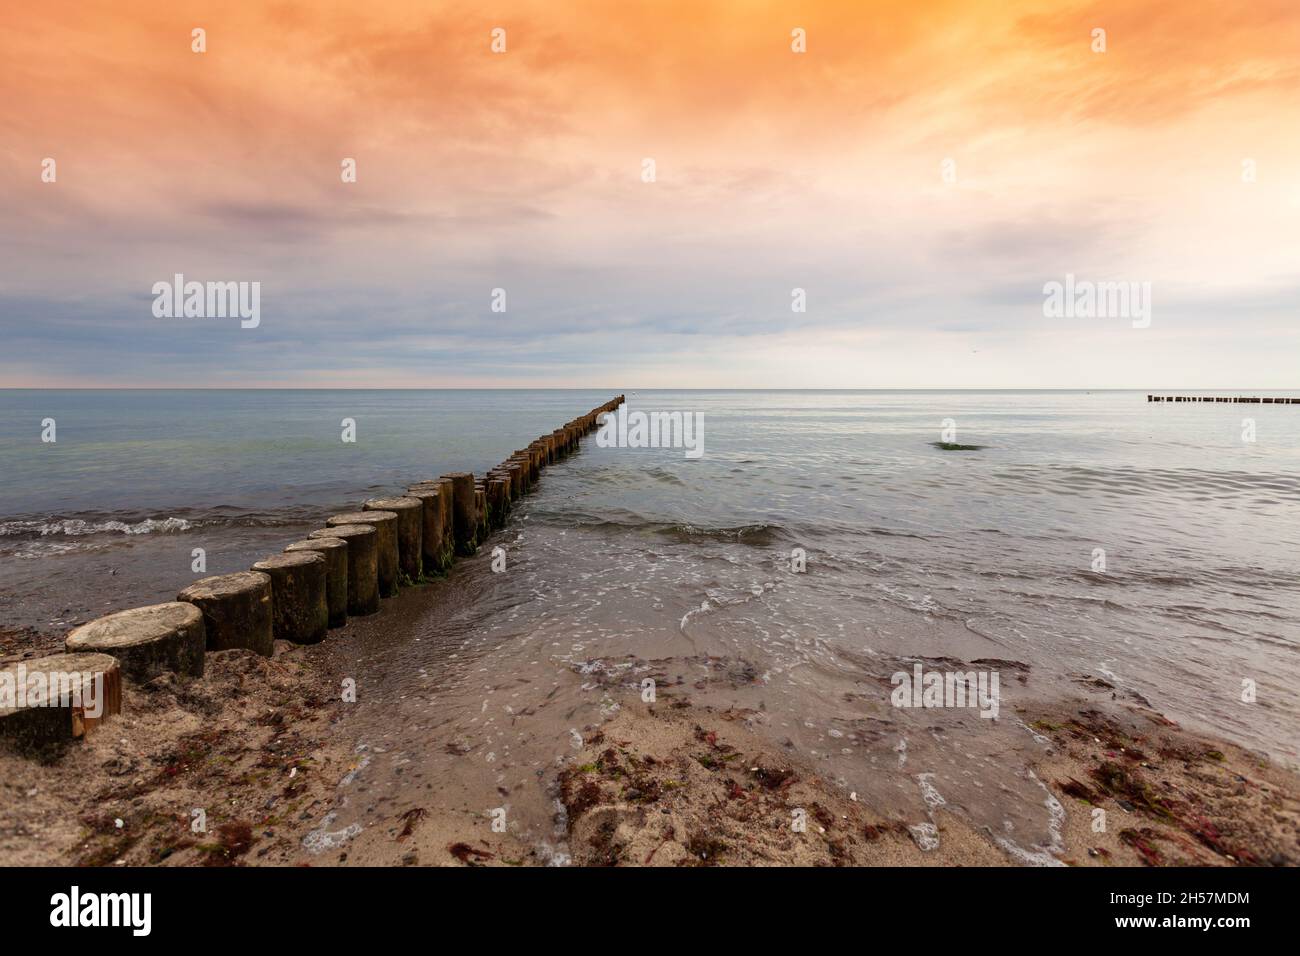 Wooden dock in the ocean. Colorful sky in the summer. Stock Photo